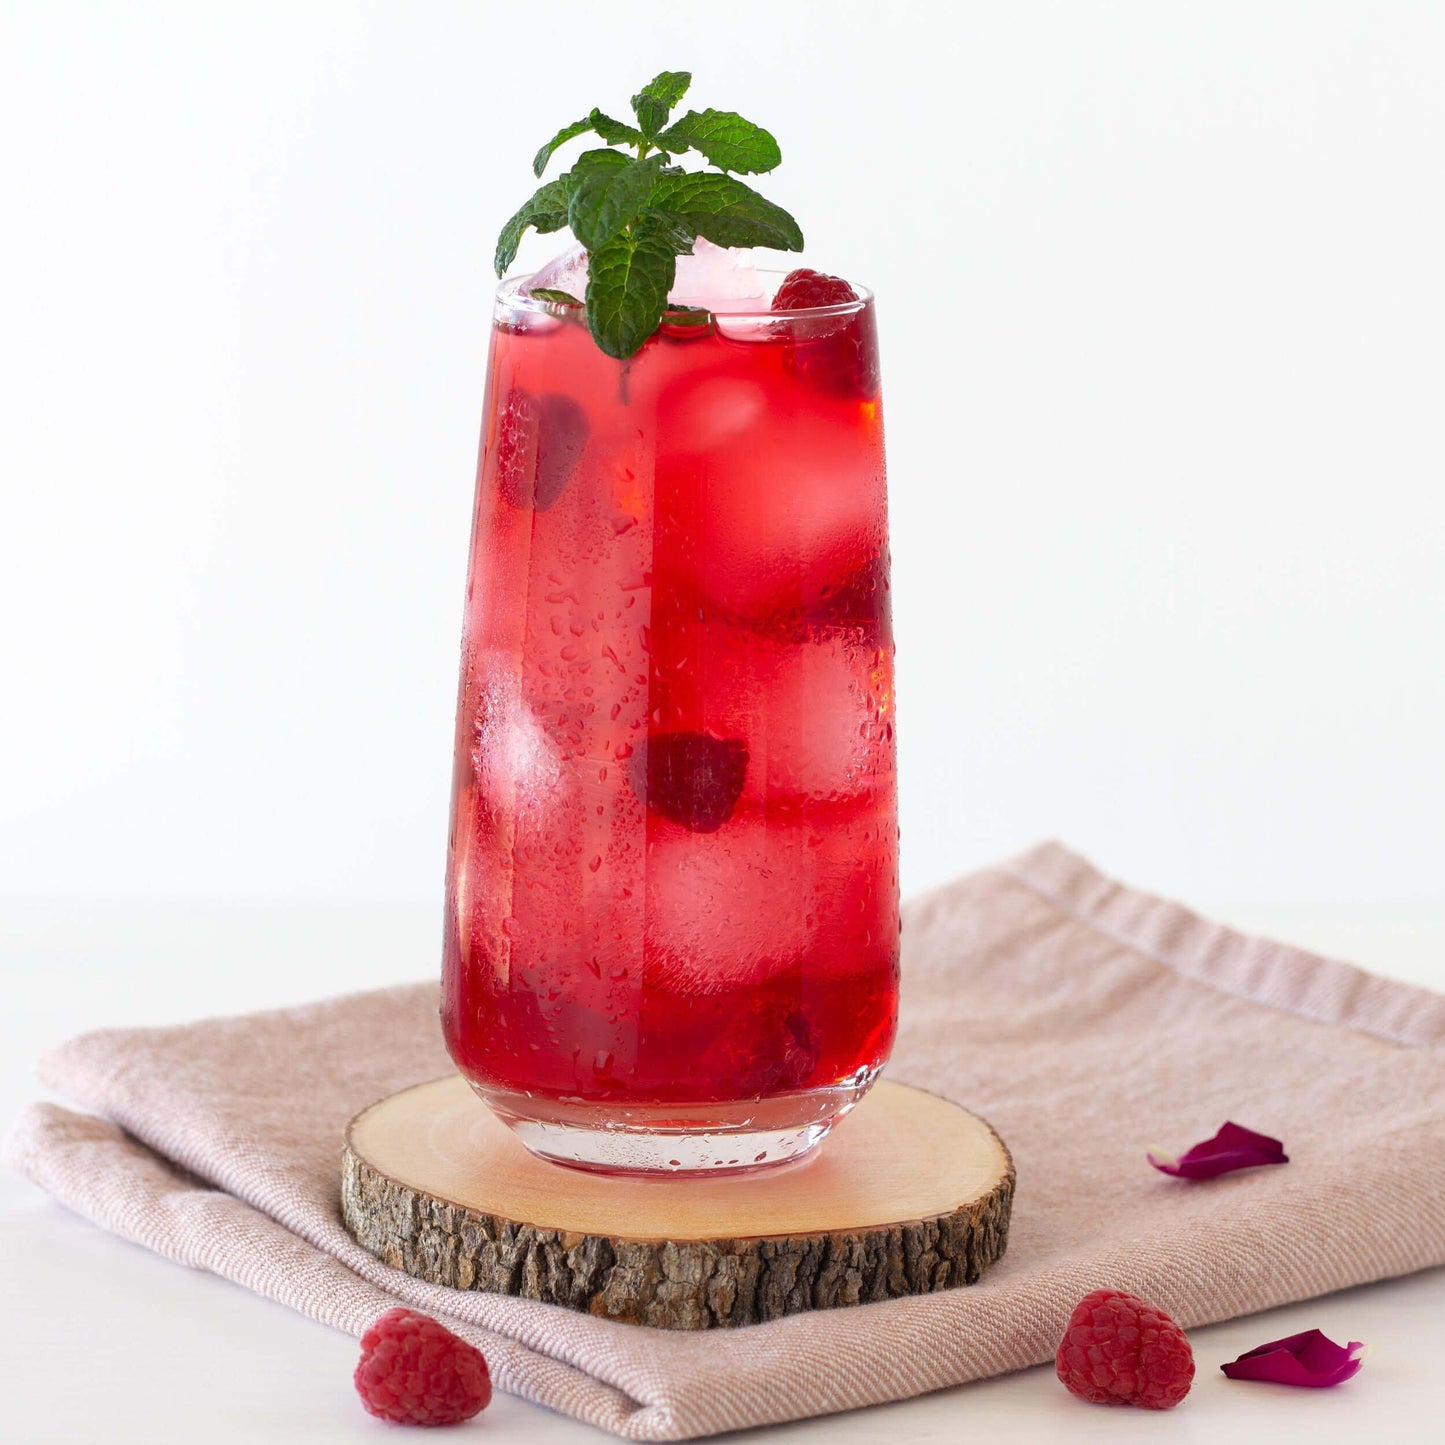 Rose Petal Raspberry Herbal Tea shown as iced tea in a clear glass with a sprig of mint and some raspberries floating in the glass. It is displayed on a wooden coaster on top of a piece of linen fabric